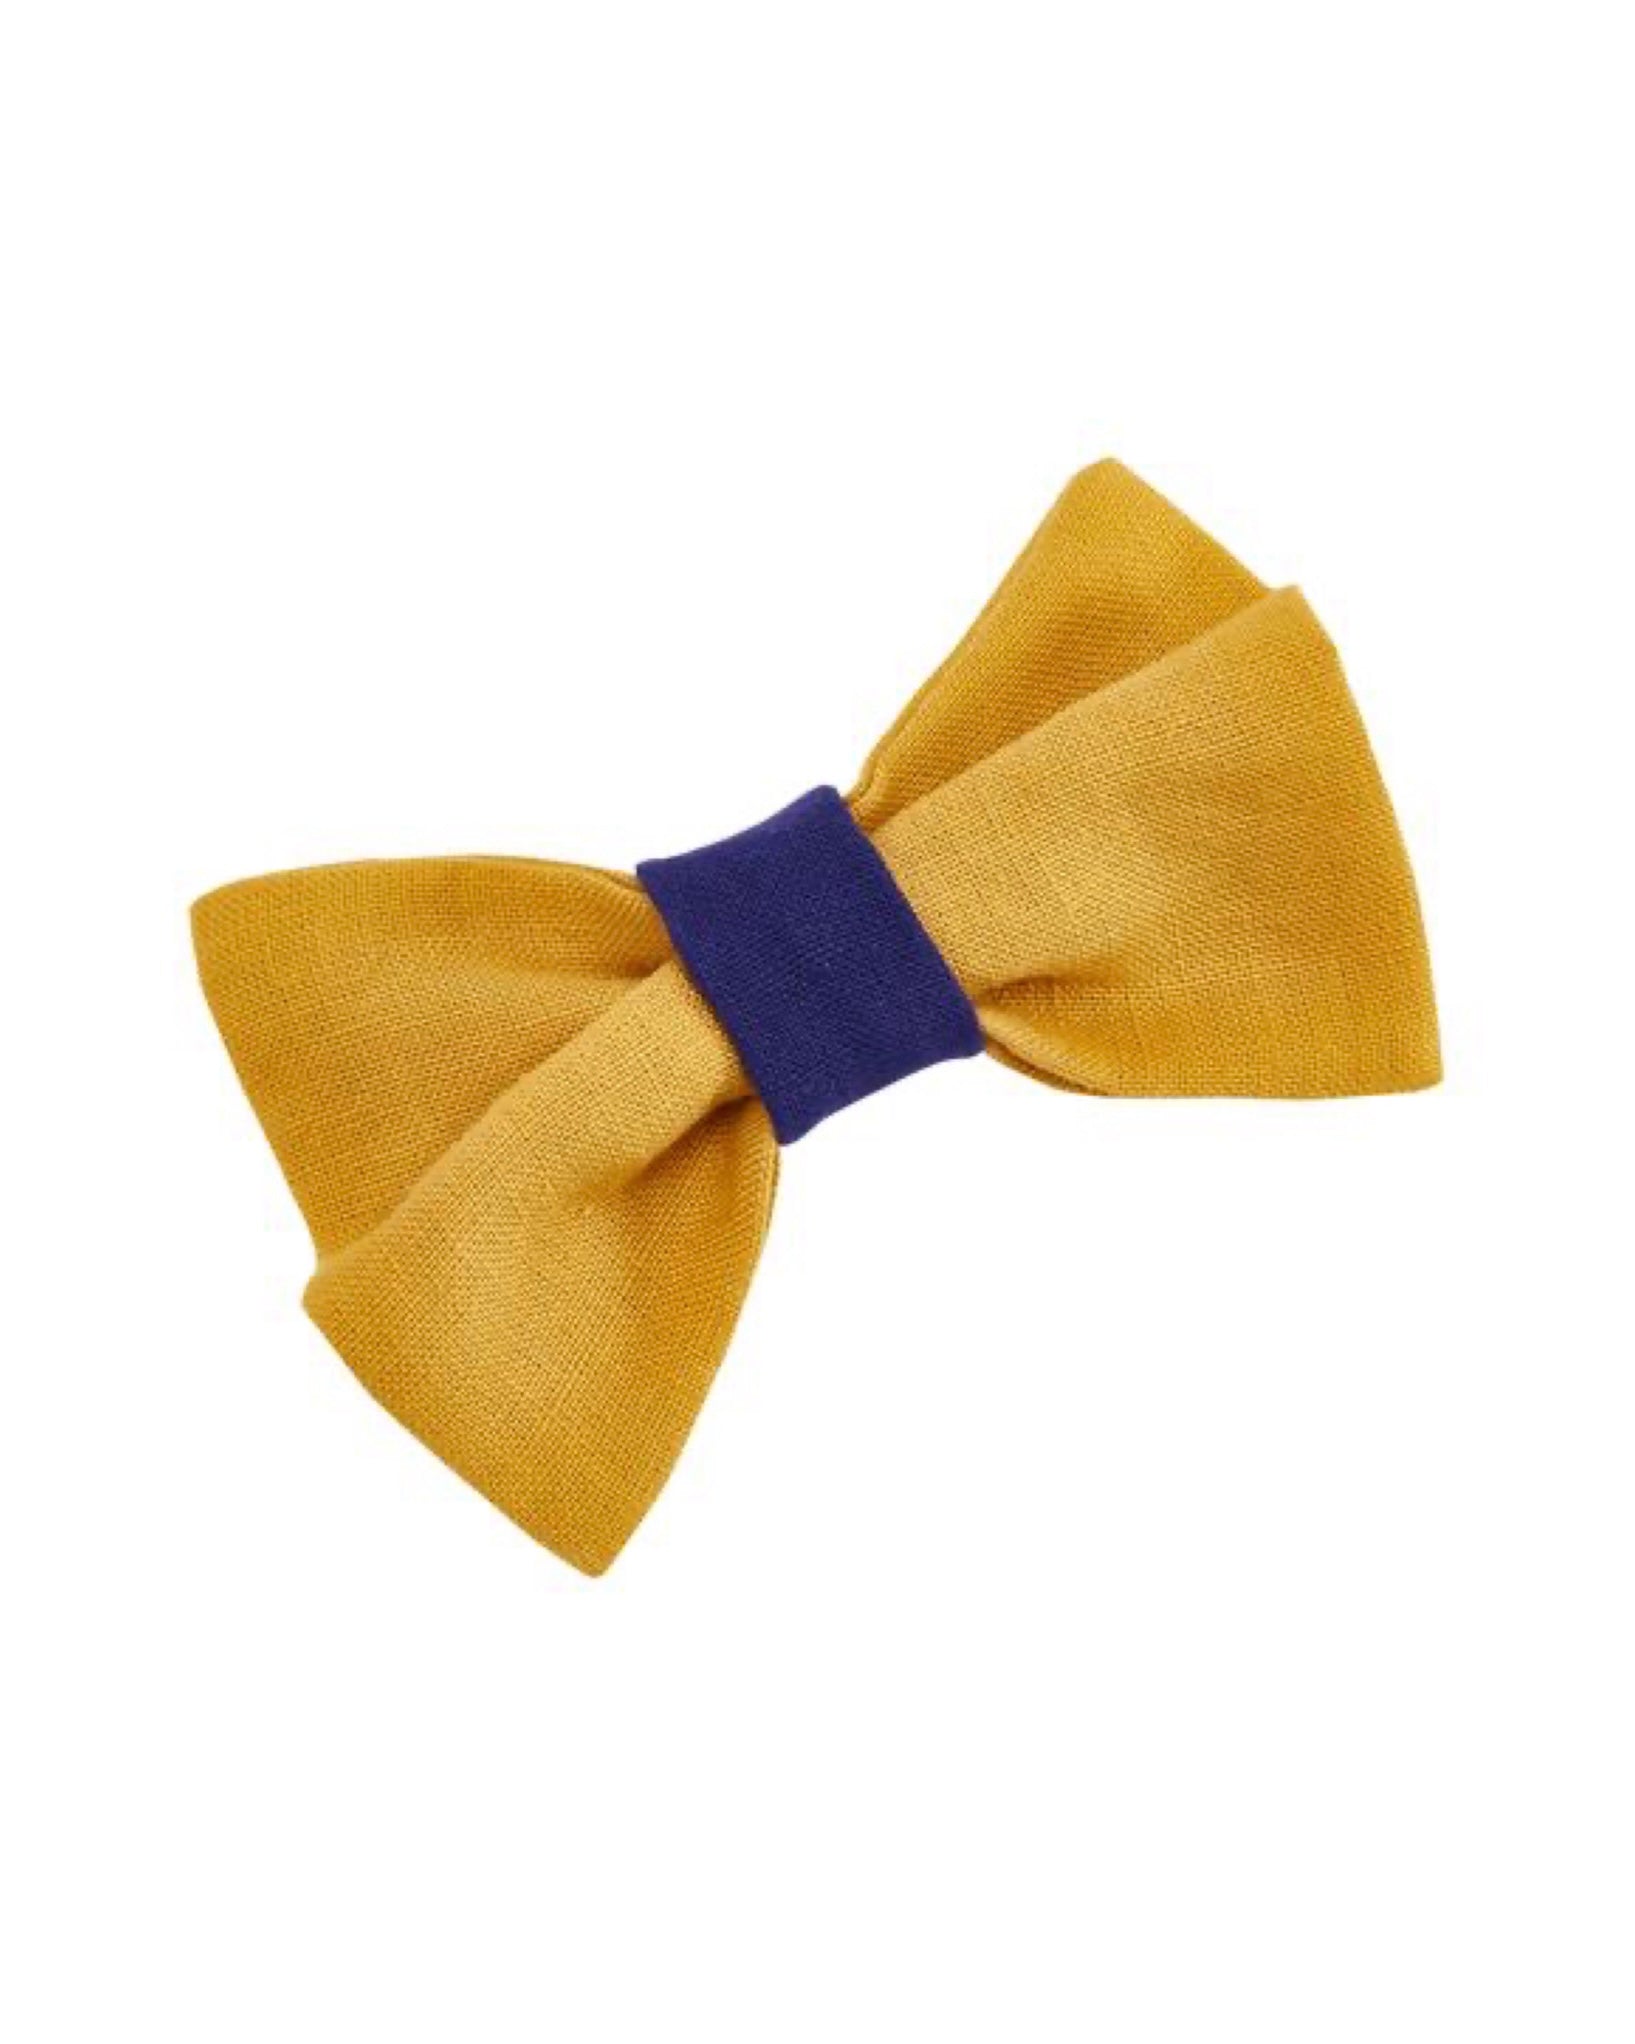 LISH Dibden Linen Bow Tie - Yellow and Violet